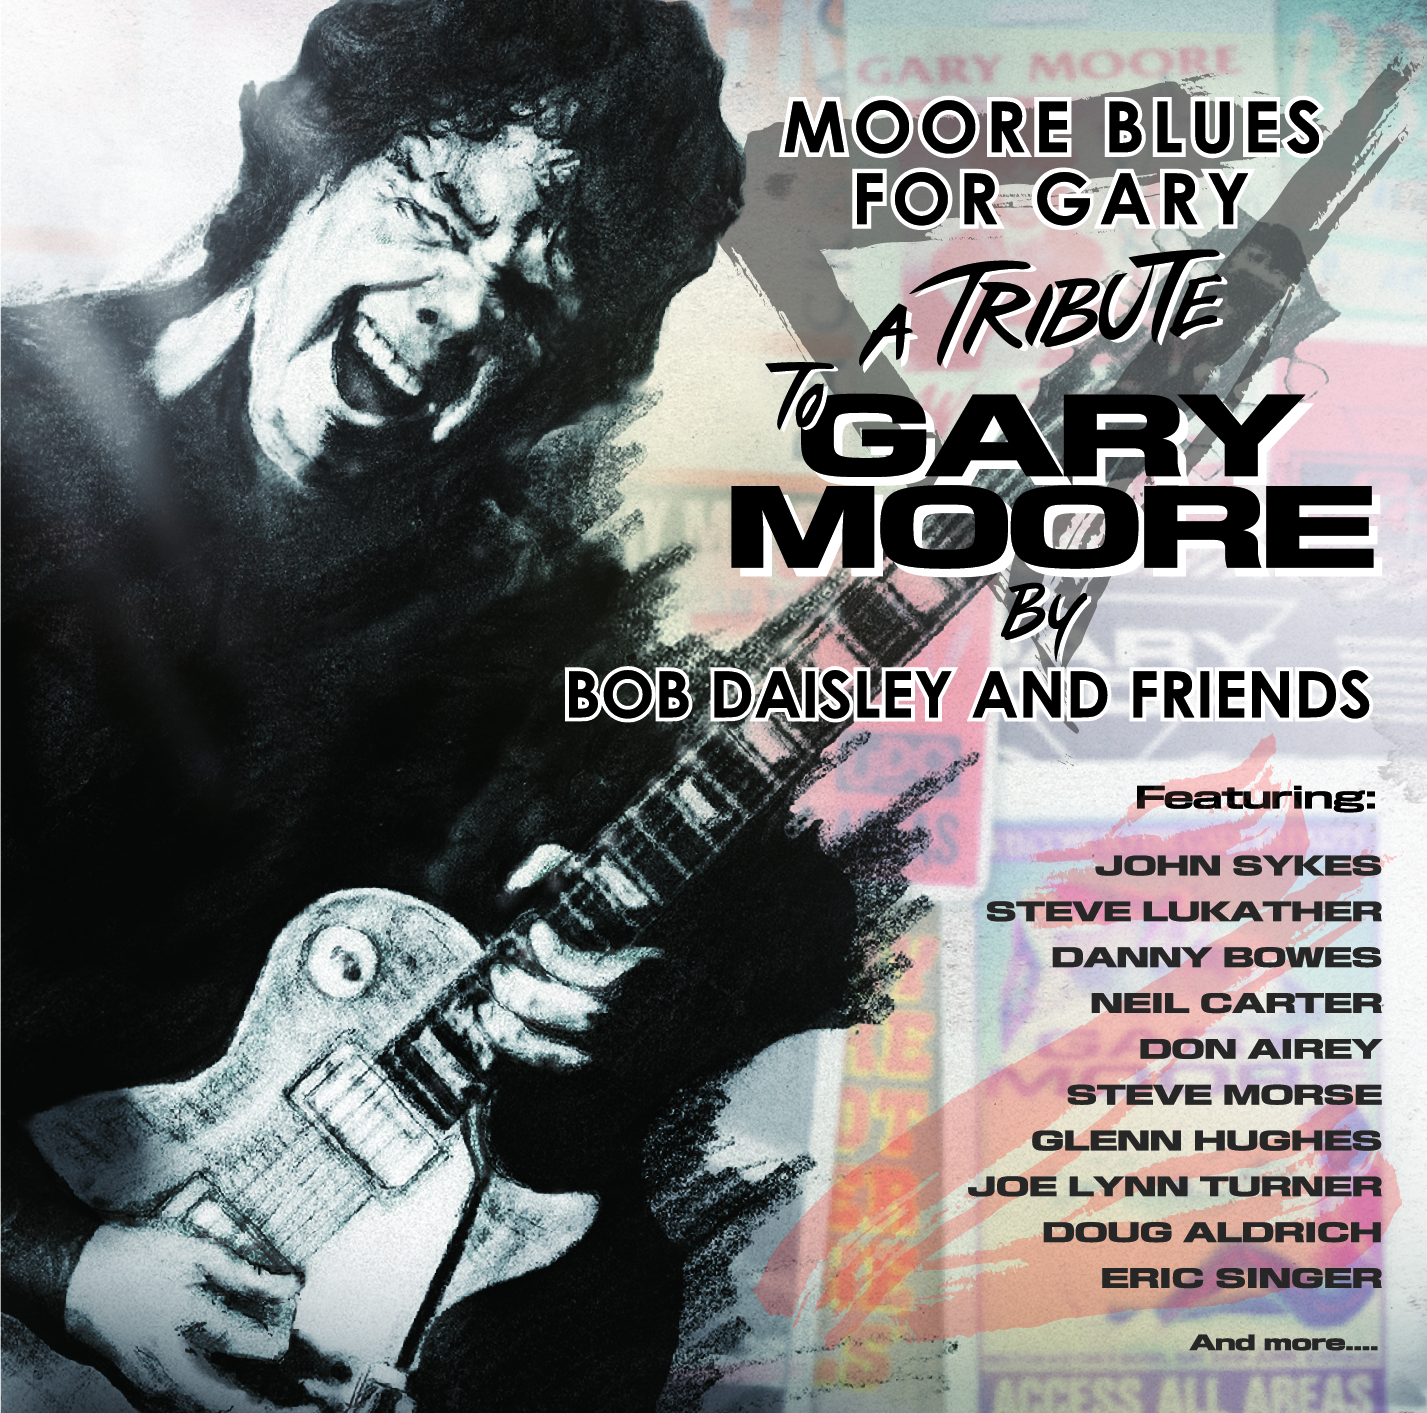 Bob Daisley and Friends - Moore Blues For Gary - CD